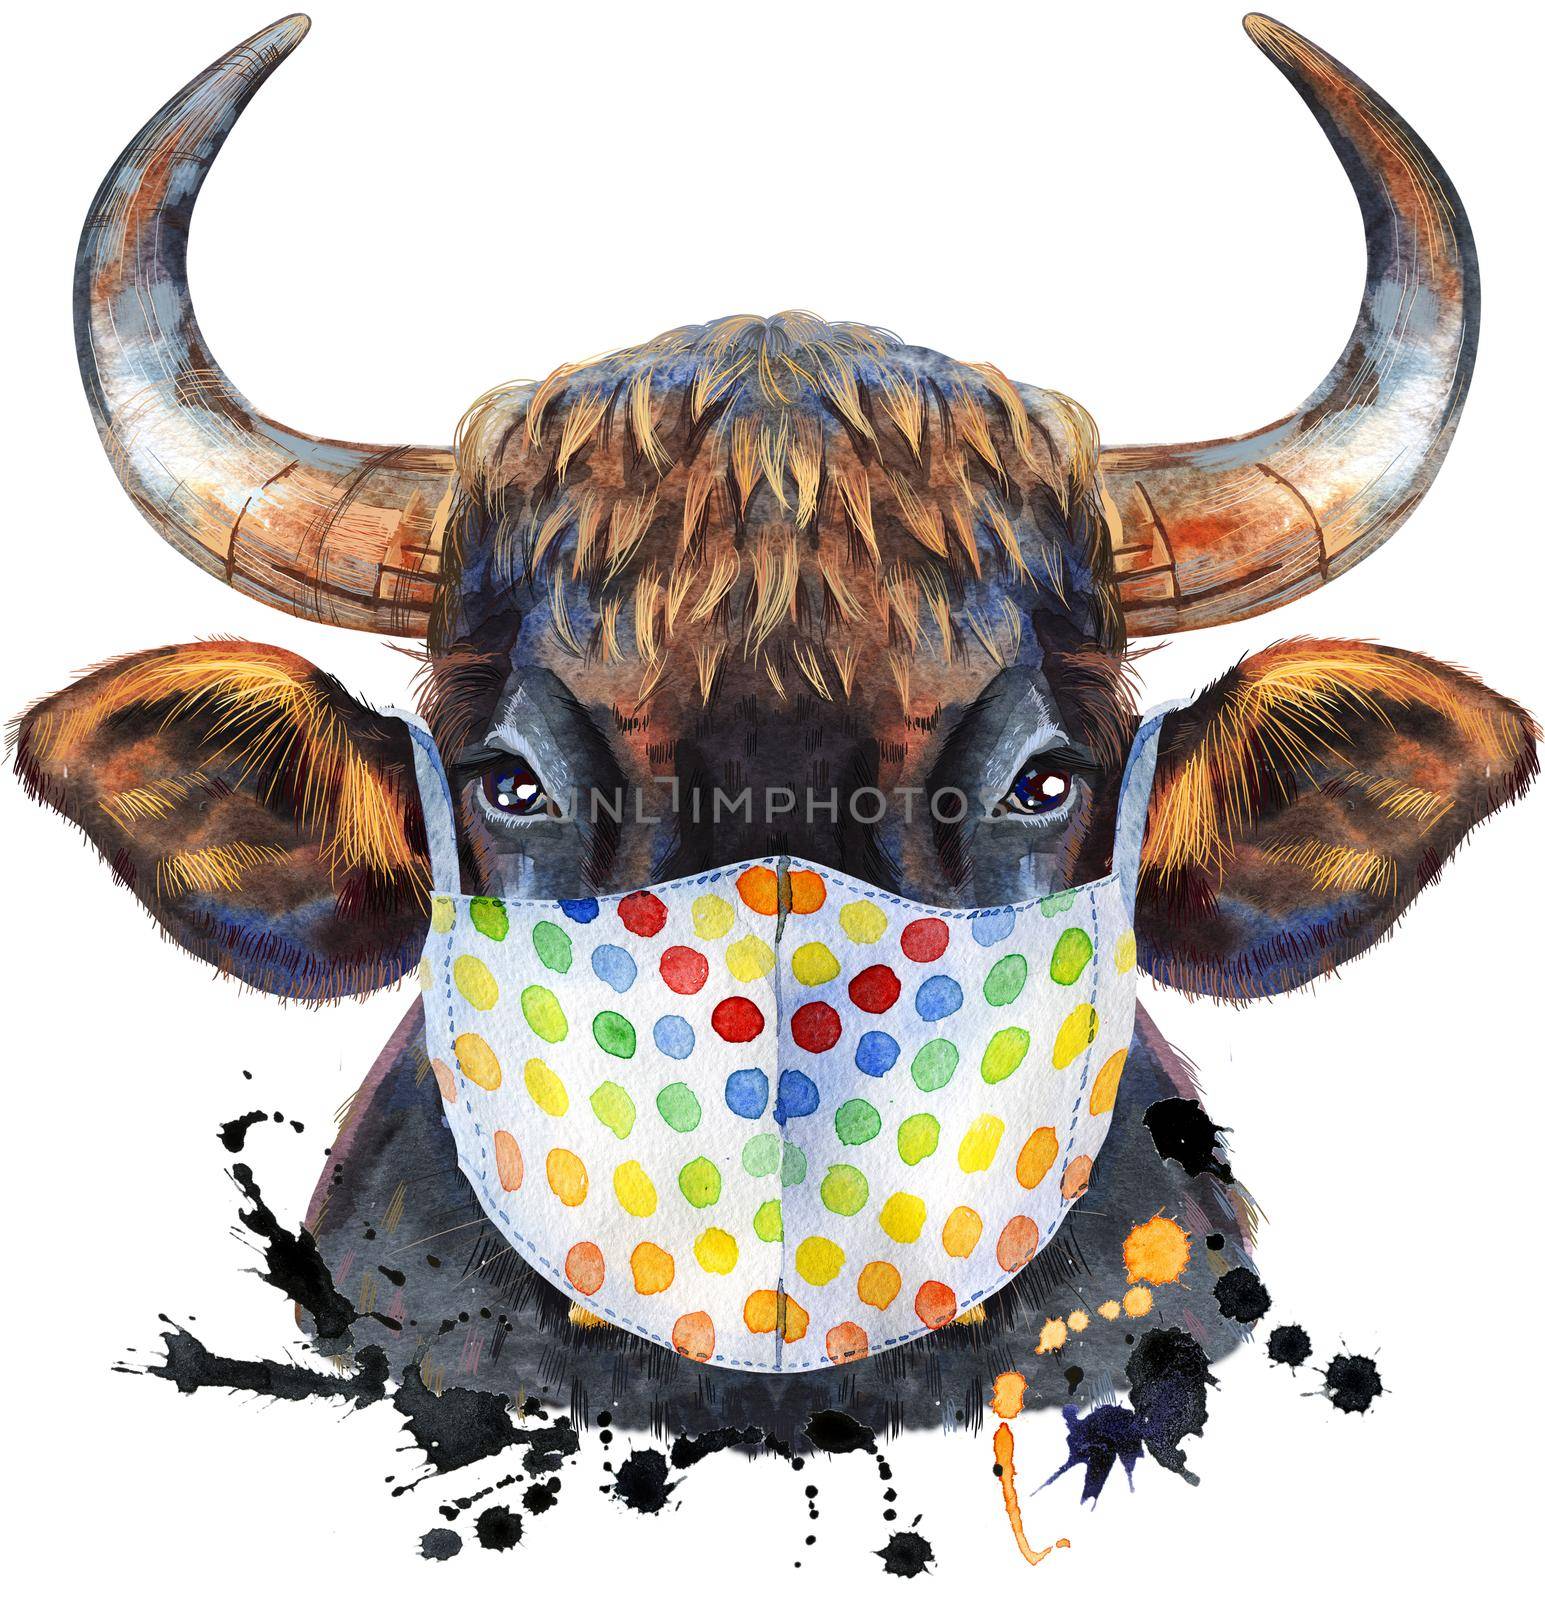 Bull in protective mask. Watercolor graphics. Bull animal illustration with splashes watercolor textured background.